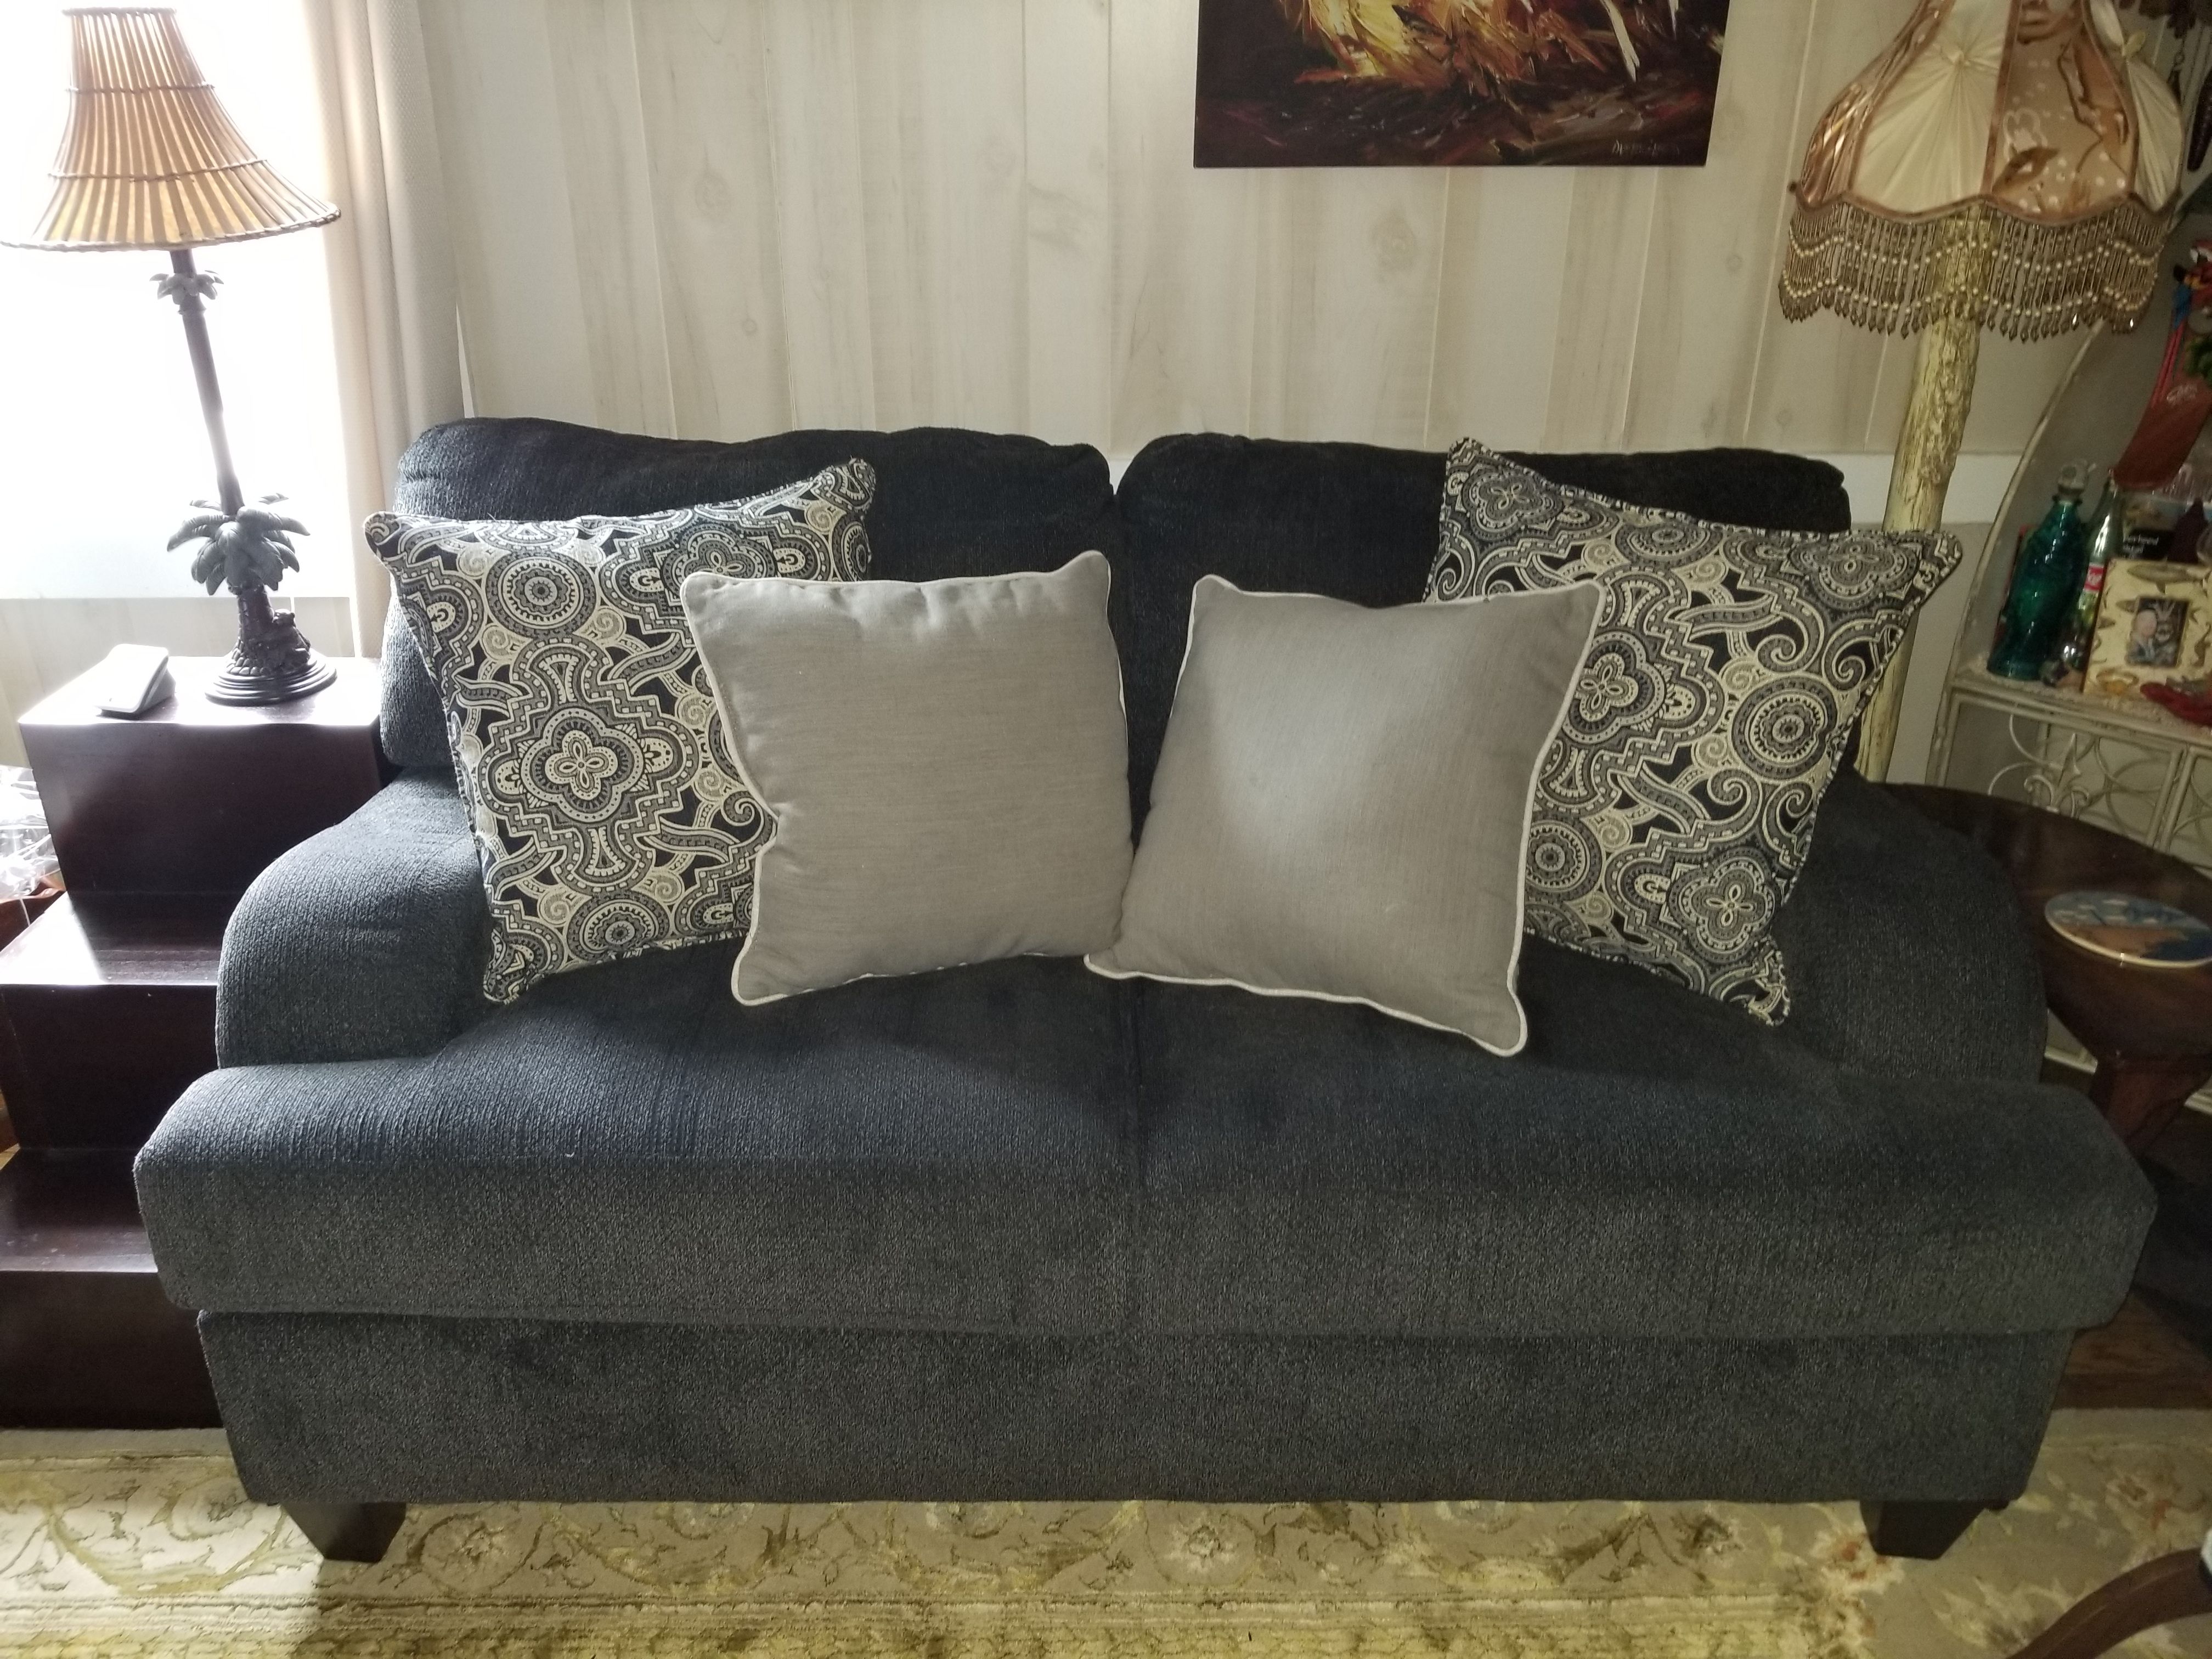 Sofa excellent condition, smoke & pet free must see